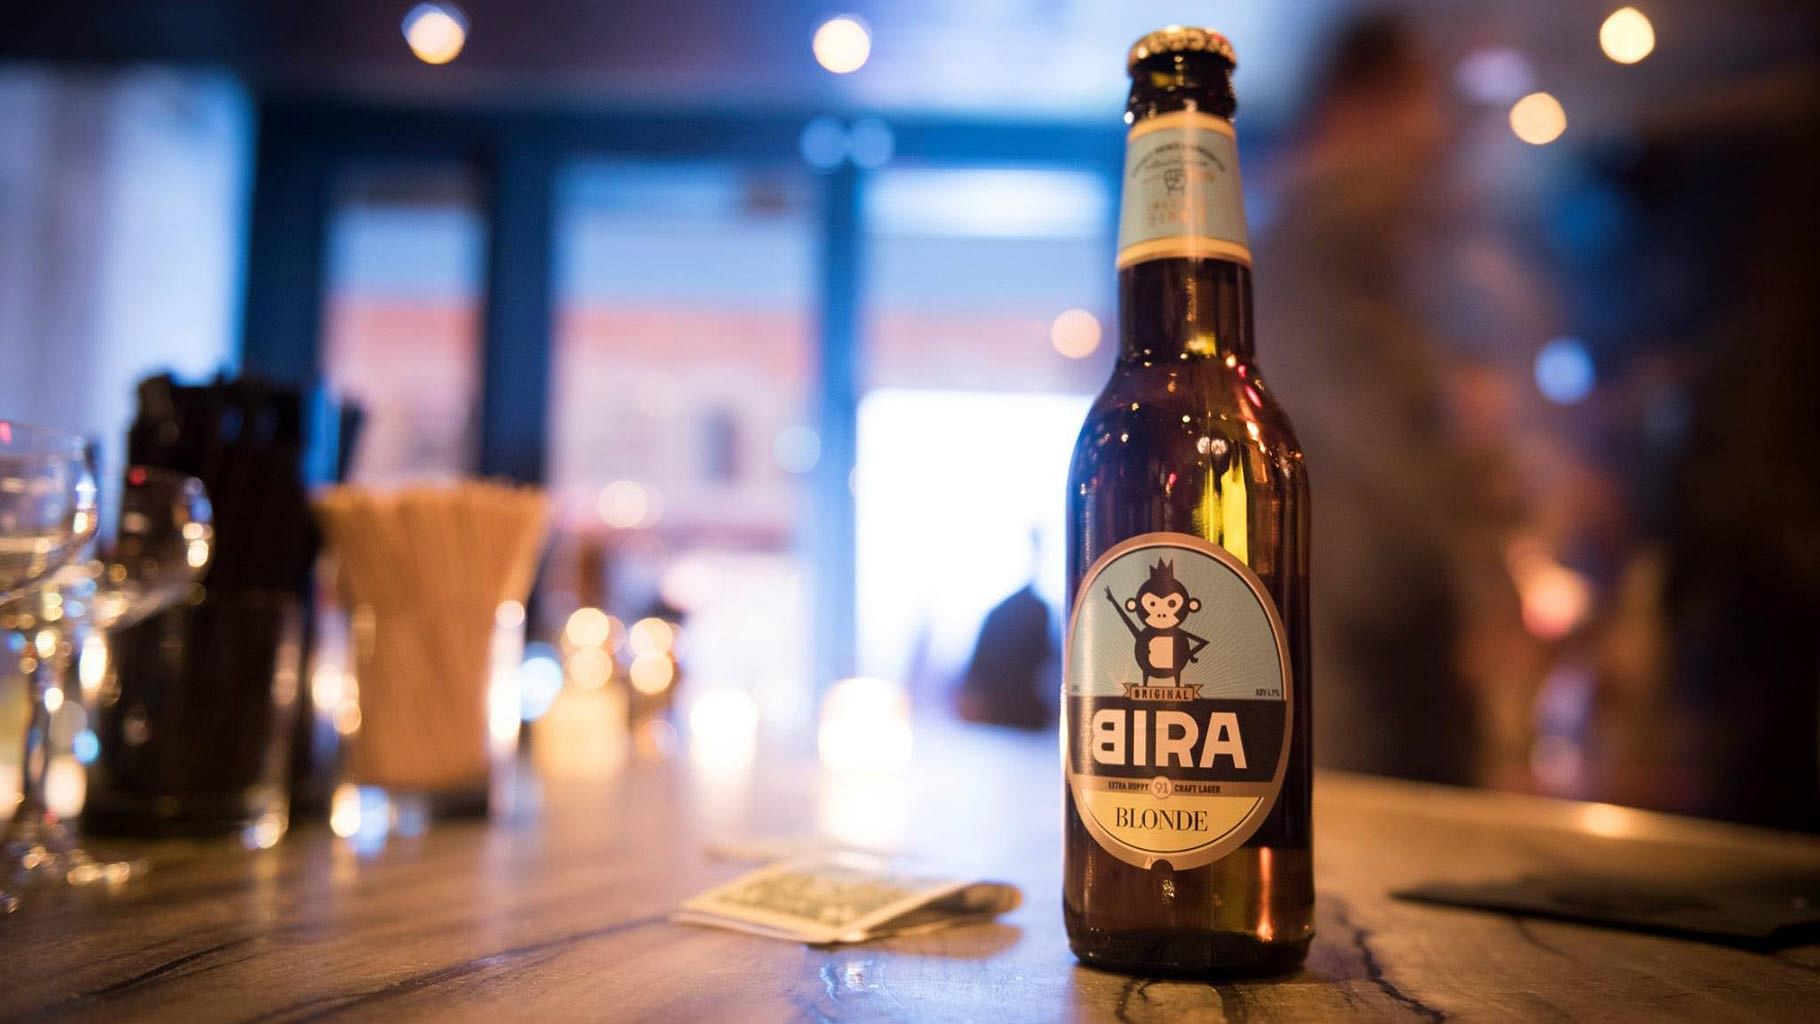 For now, Bira 91 will stick to its Rs 100 price point. (Photo courtesy: Facebook/<a href="https://www.facebook.com/bira91beer/?fref=ts">Bira 91</a>)